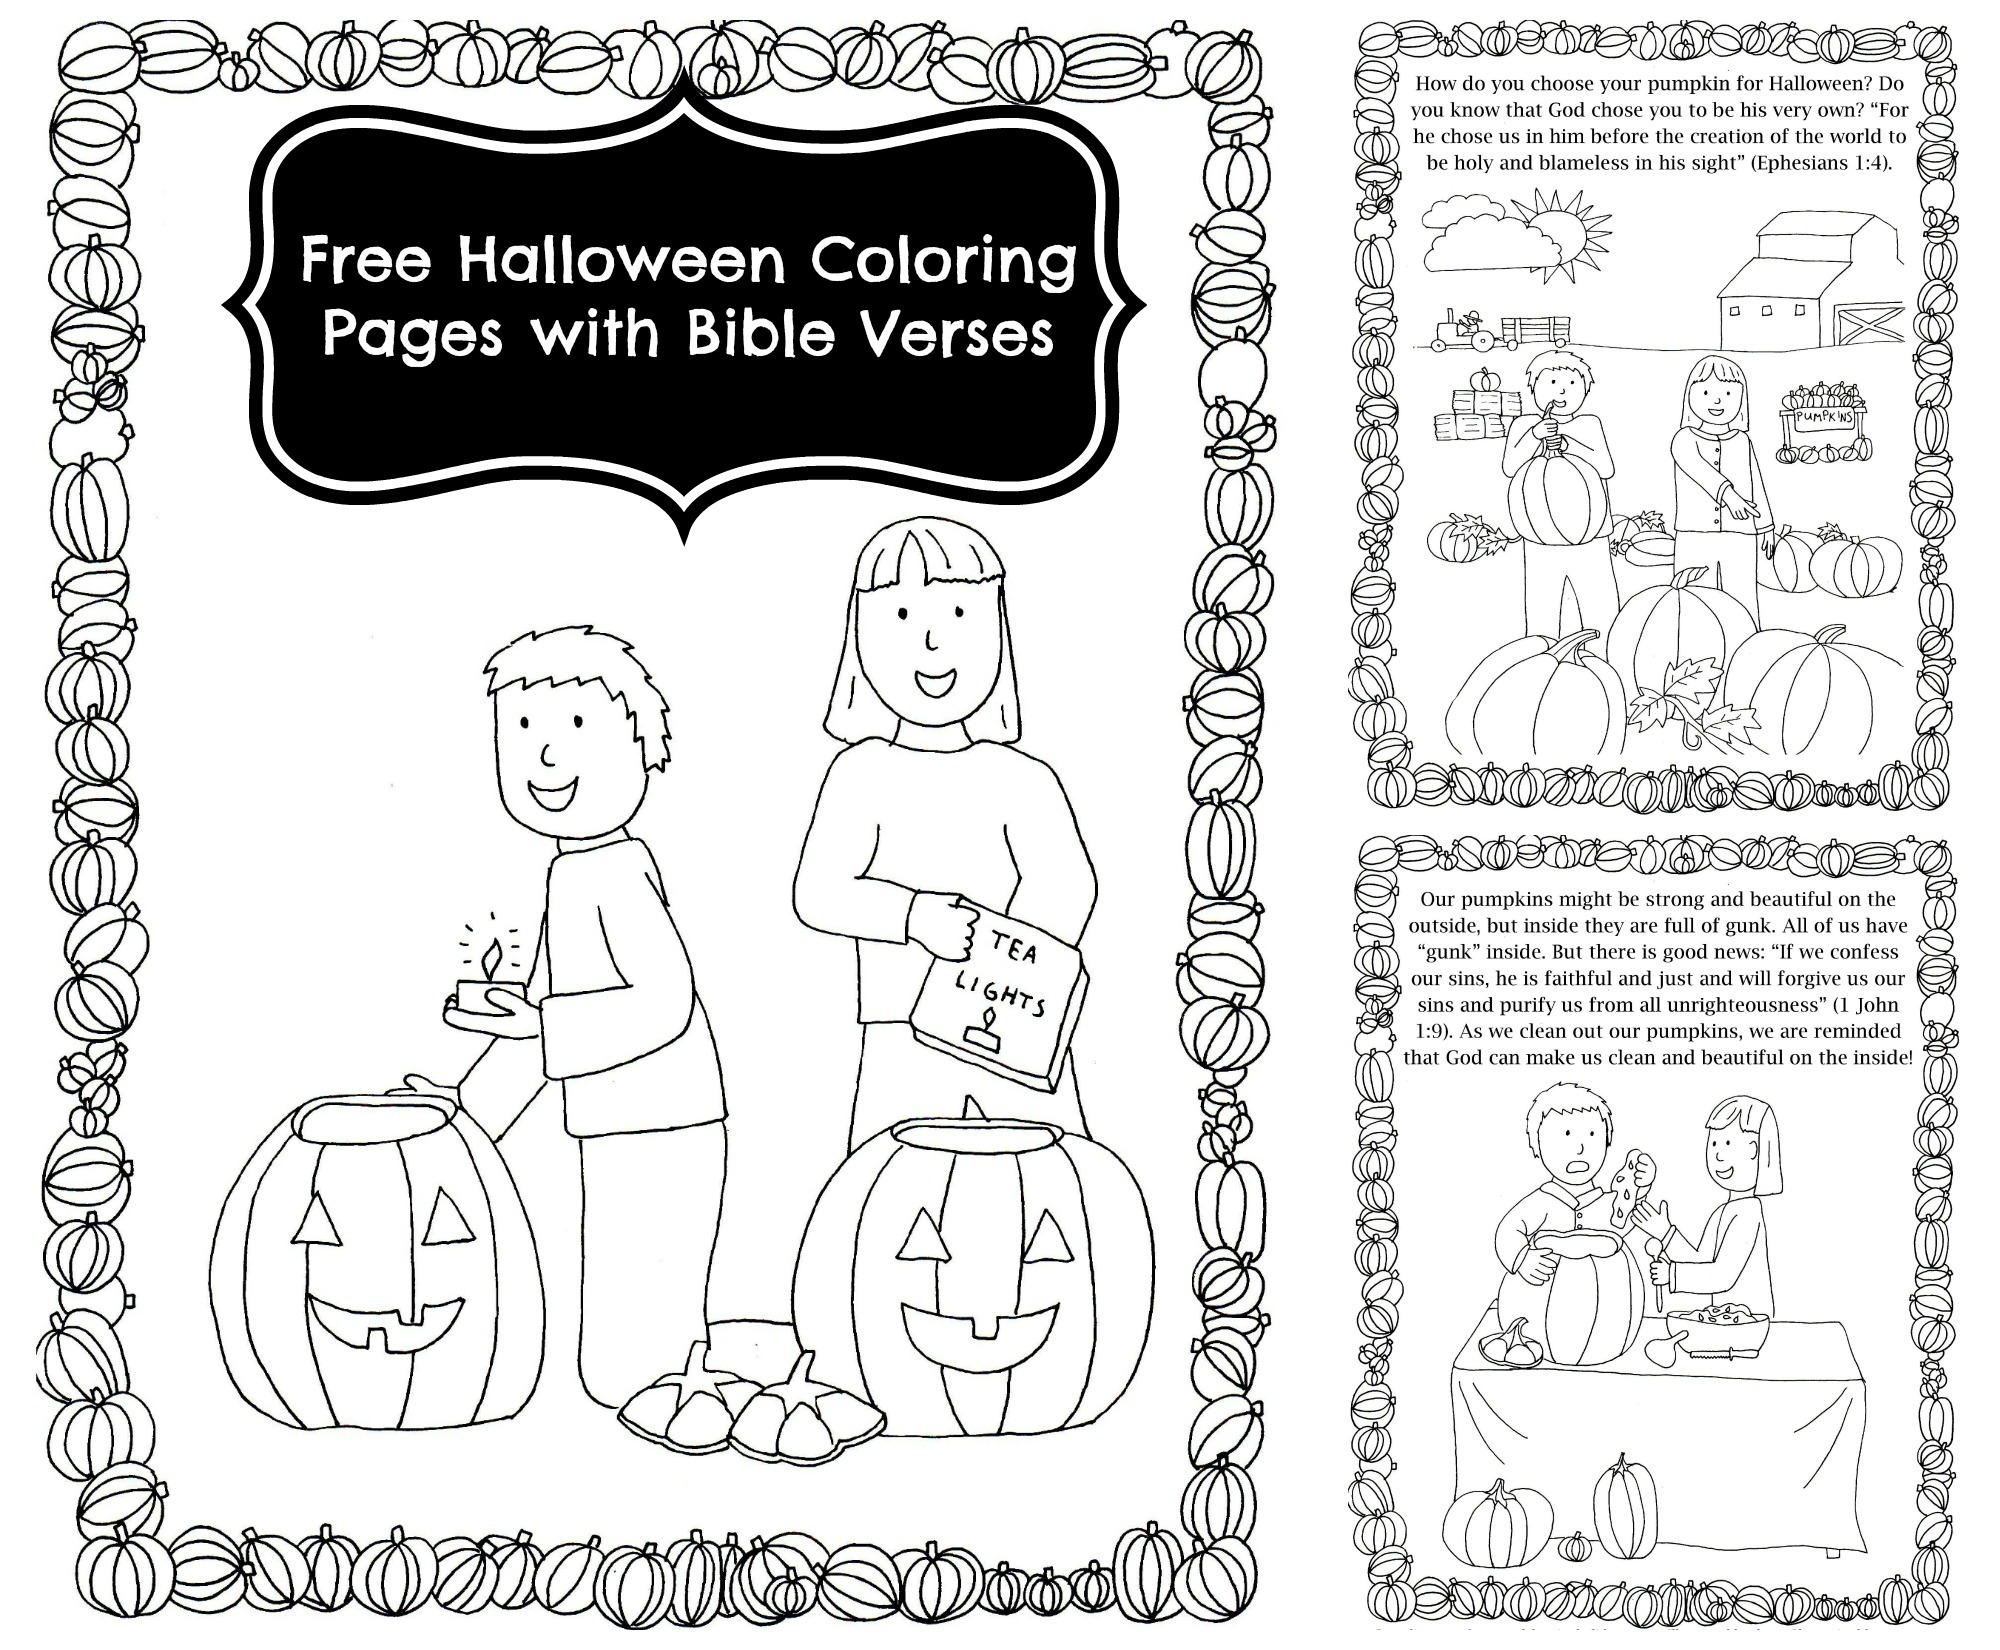 Pumpkin Carving Coloring Pages With Bible Verses For Halloween Celebrating Holidays